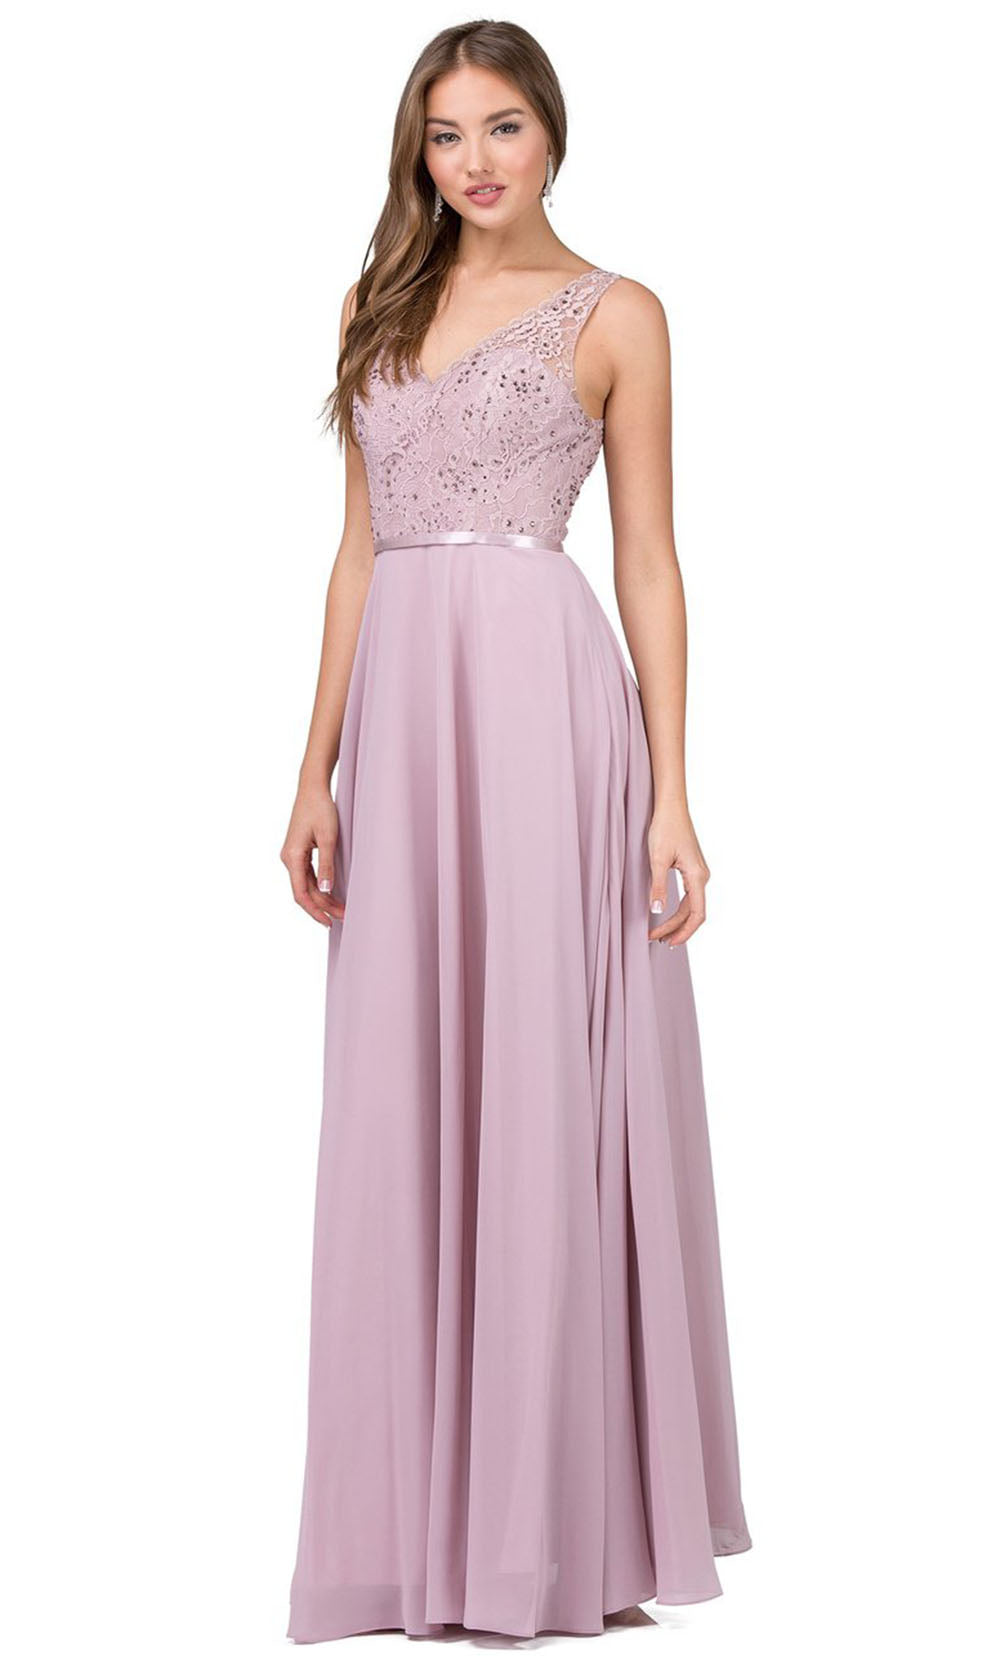 Dancing Queen - 2267 Embroidered V Neck A-Line Dress In Pink